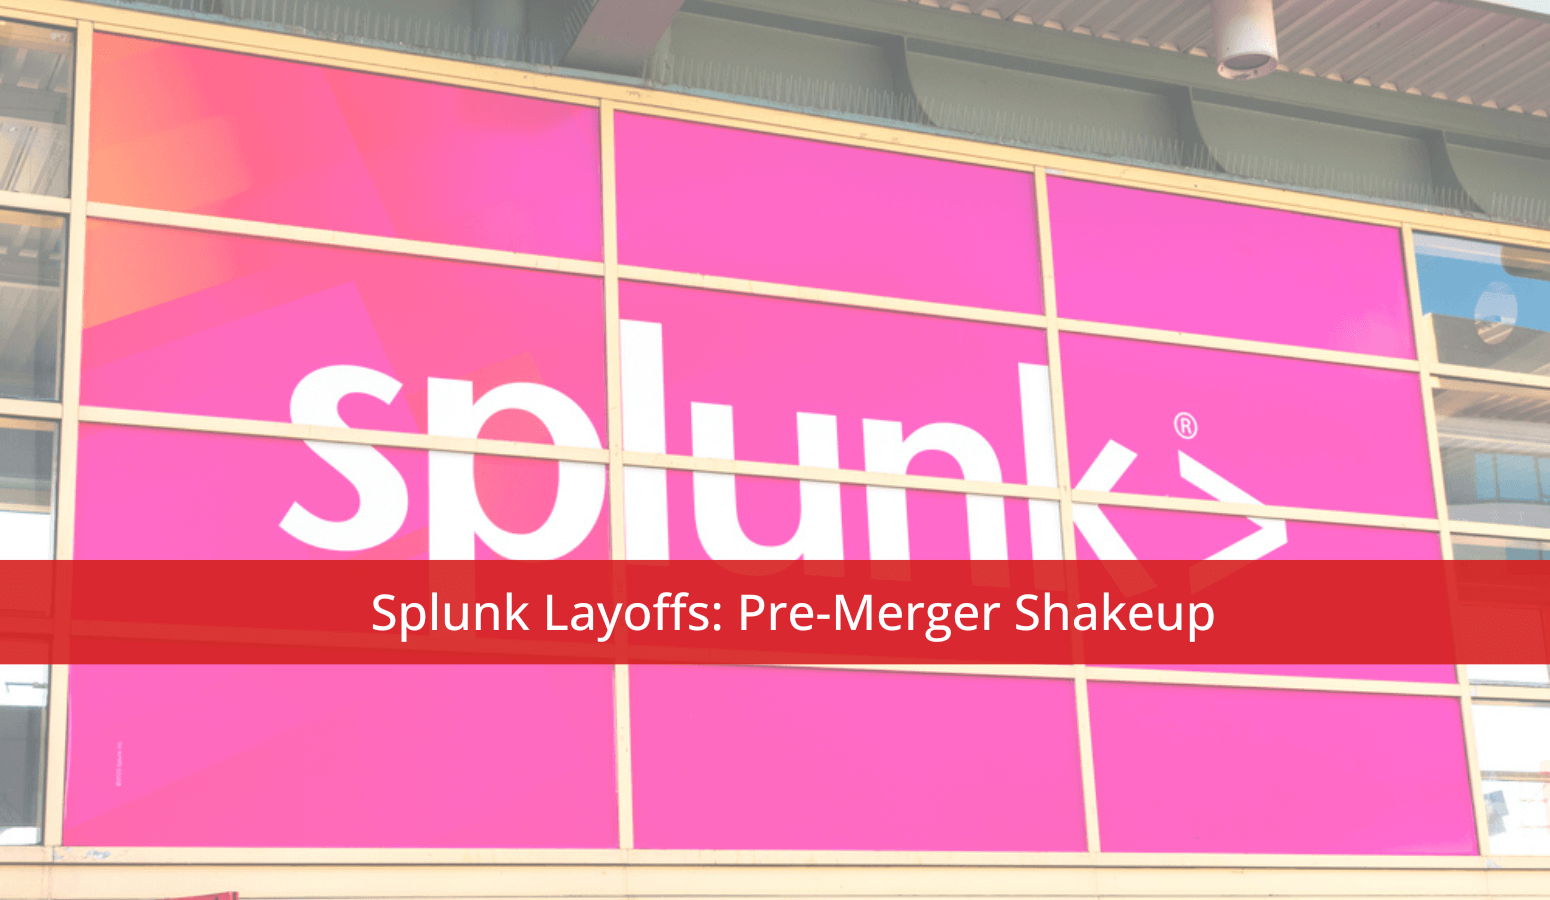 Featured image for “Splunk Layoffs: Pre-Merger Shakeup”